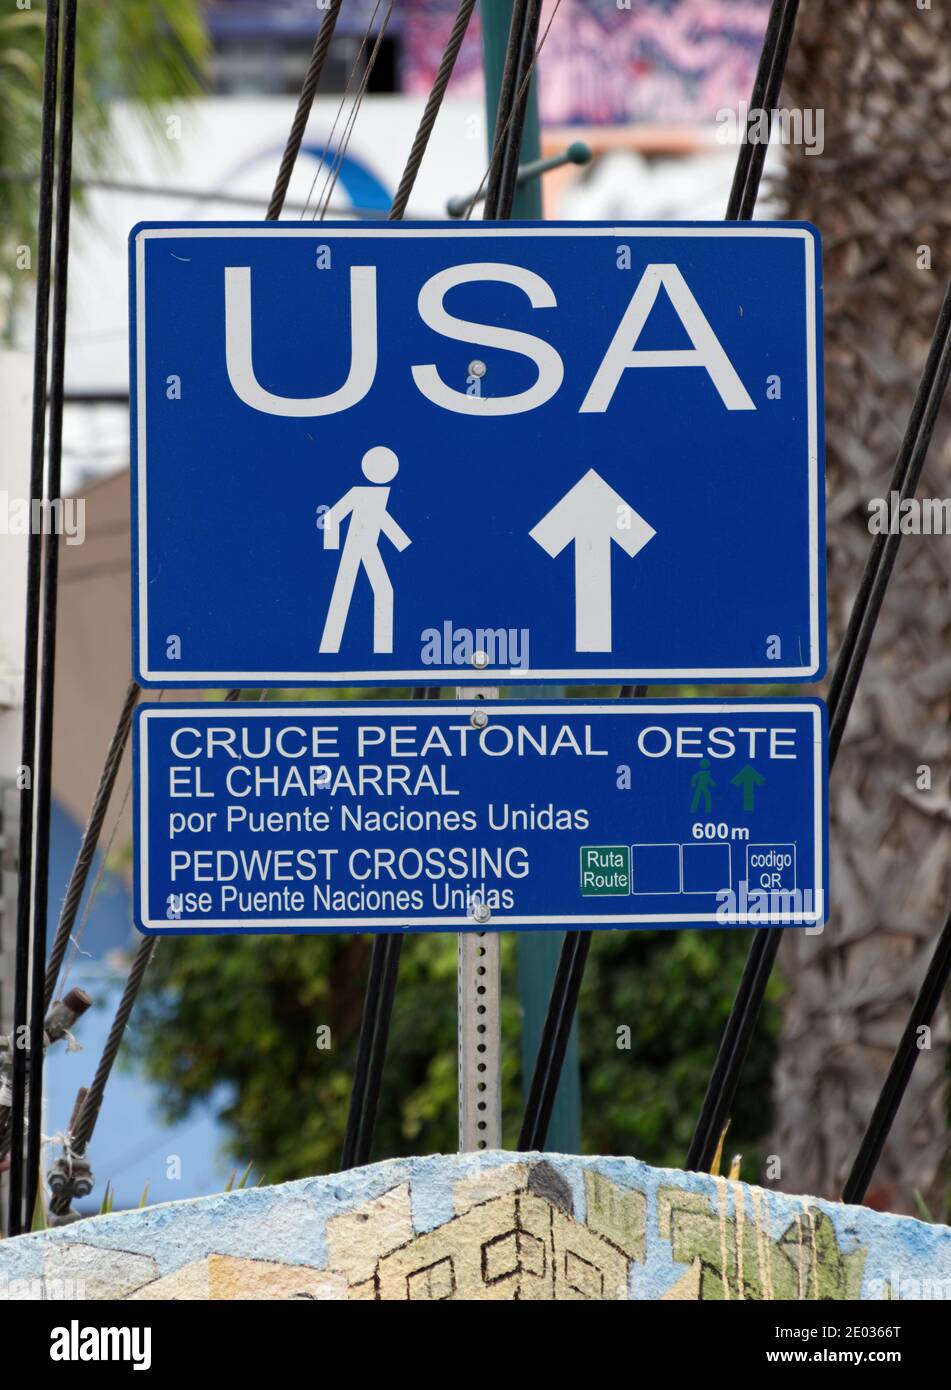 Tijuana, Mexico - October 20, 2017: Signage indicating location of border crossing for pedestrians from Mexico to USA Stock Photo